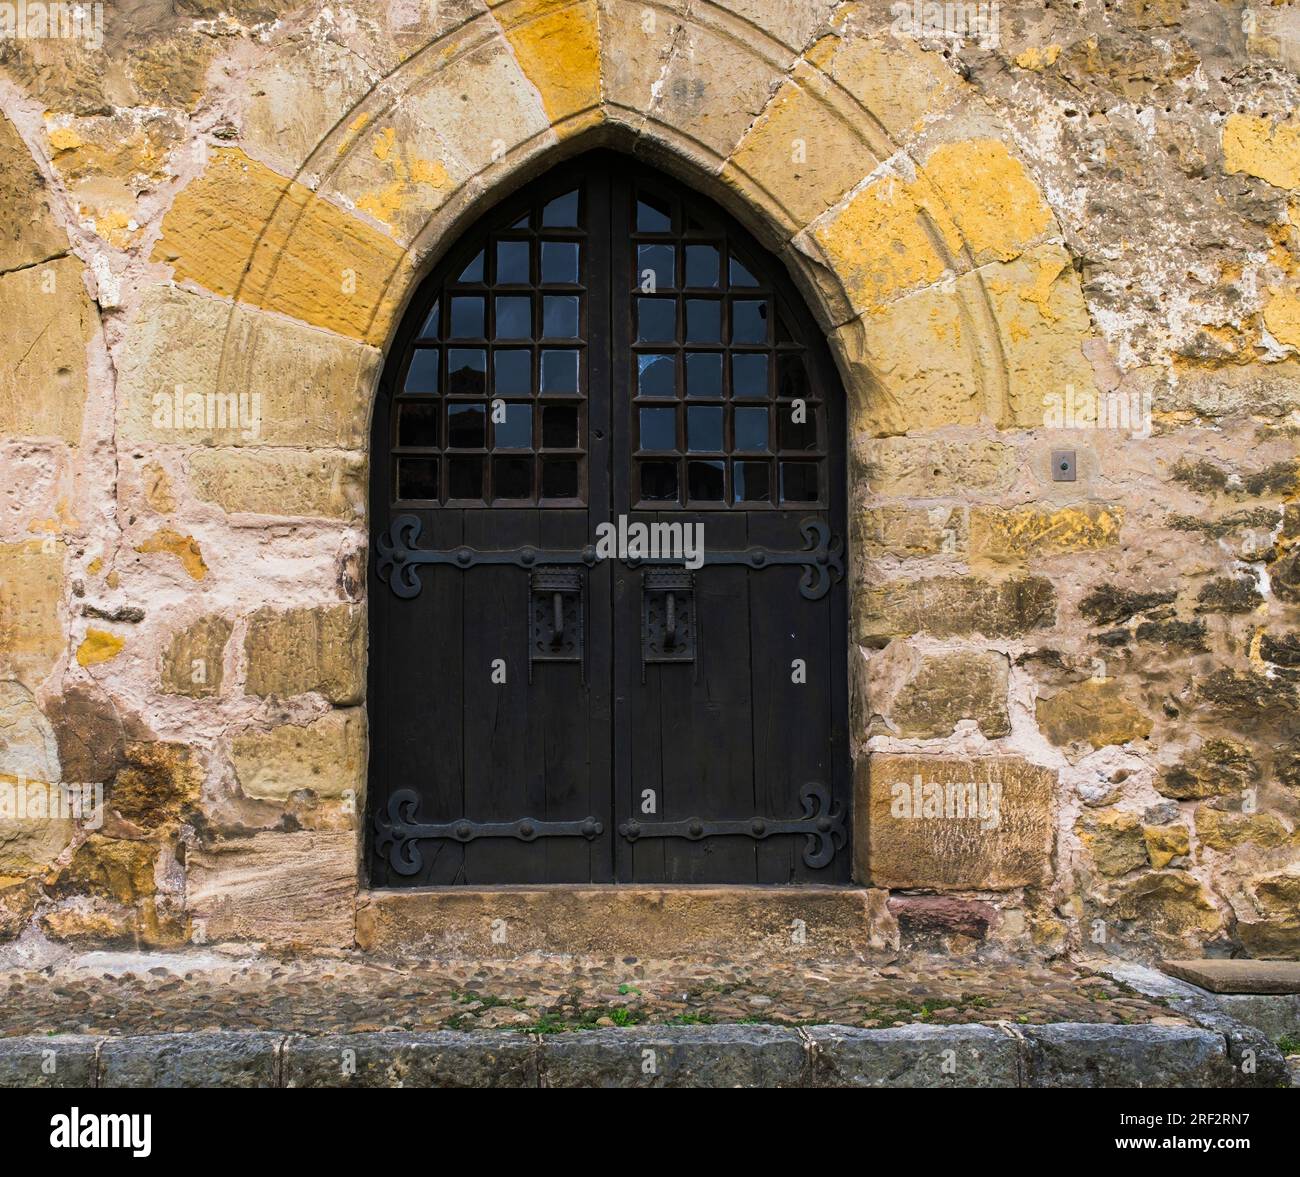 Ancient dark wooden door with pointed arch in stone wall, in the Cantabrian town of Santillana del Mar. Stock Photo